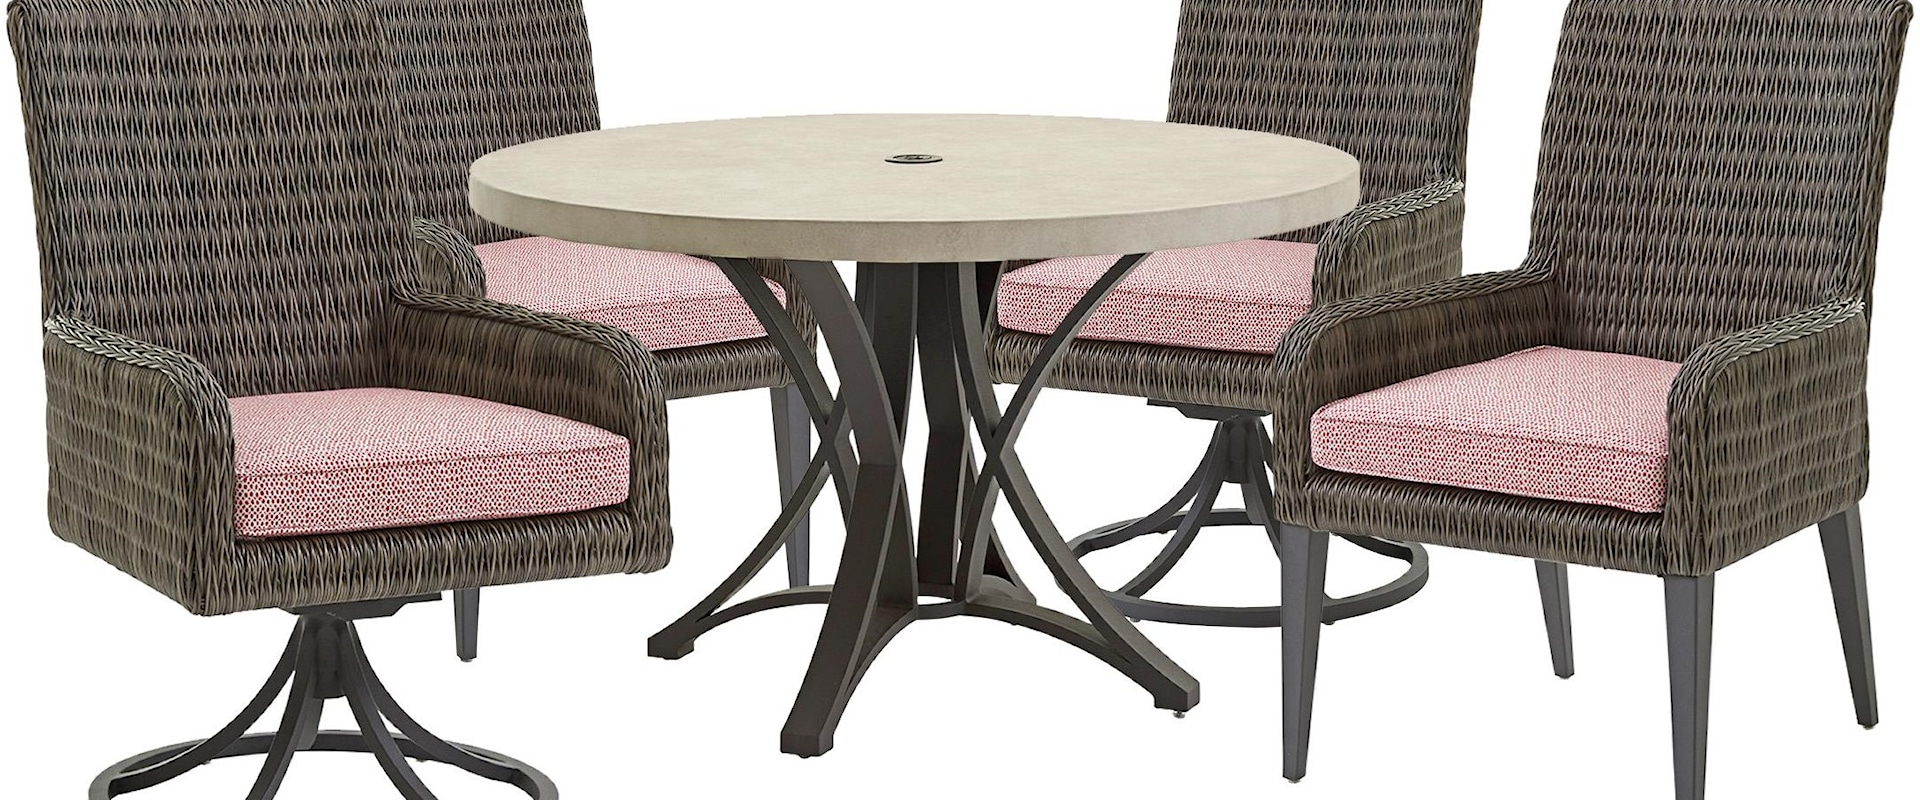 48" Round Table, 2 Dining Chairs, and 2 Swivel Rocker Chairs